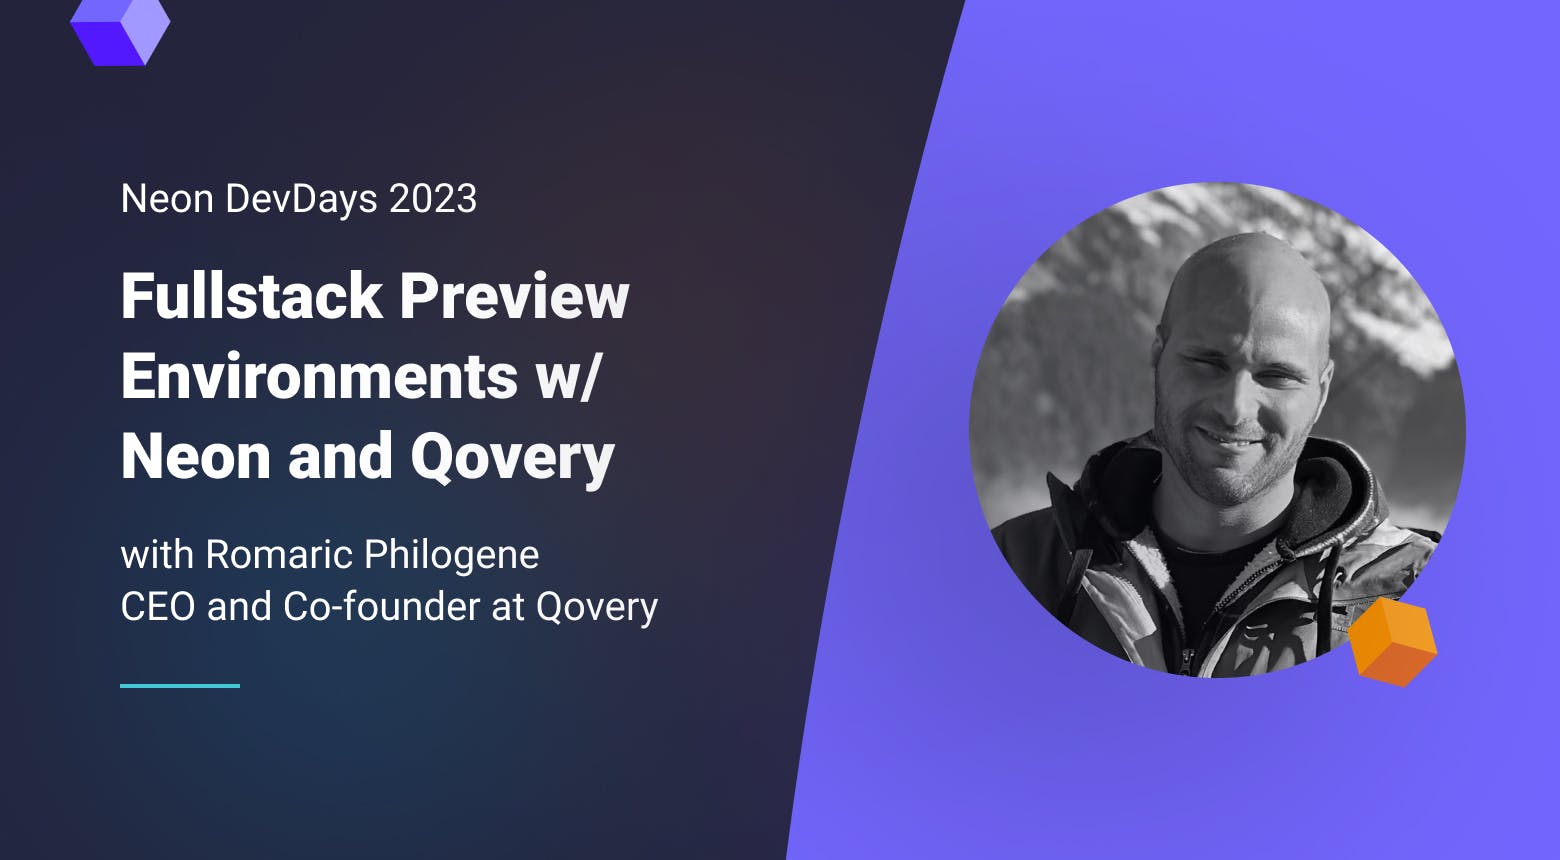 Fullstack Preview Environments with Neon and Qovery - Qovery